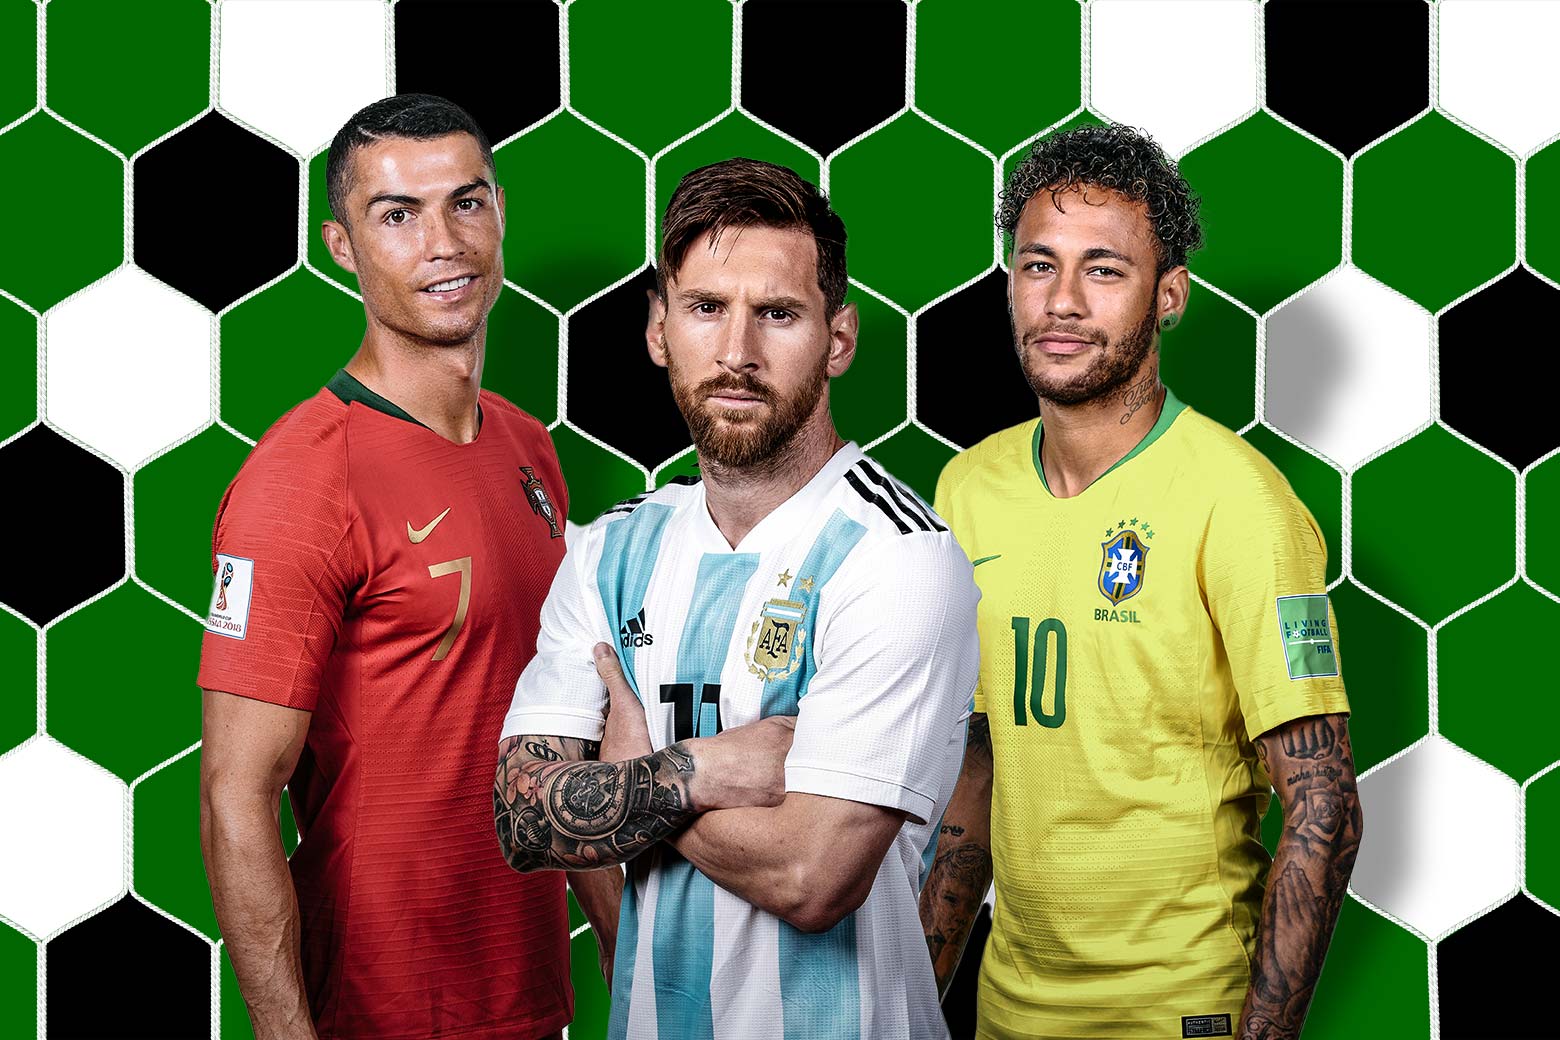 Cristiano Ronaldo, Lionel Messi, and Neymar posing together, Ronaldo and Neymar smile with Messi in the middle, arms folded and frowning, the octagonal grid of a soccer net illustrated in a scrim behind them